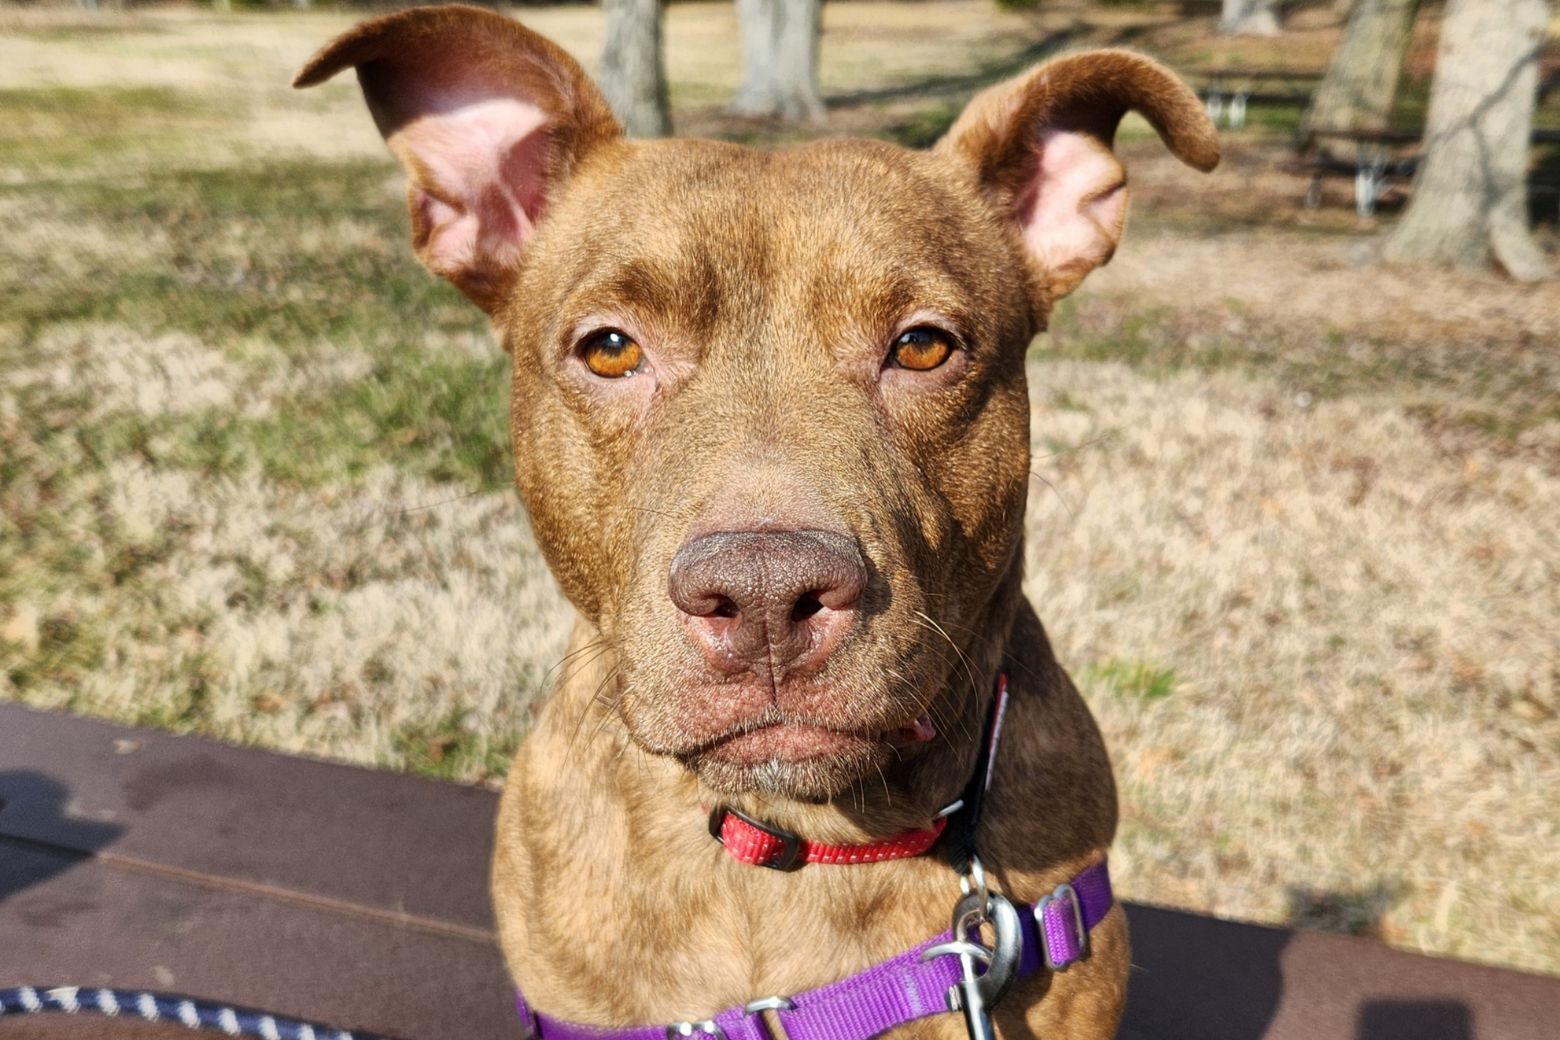 <p>Meet Gala!</p>
<p>Gala is a gentle girl in need of reassurance and kindness. She is so SWEET, but her confidence is hiding. Gala was a stray dog, so we don&#8217;t know her backstory. Everyone at the Humane Rescue Alliance has been fussing over her, and we are winning her heart with yummy treats and gentle conversation. She would love a home with a family that will help her blossom!</p>
<p>And speaking of &#8220;blossoming,&#8221; a volunteer who recently took Gala out of the shelter for a morning adventure said, “While the shelter makes her nervous, the moment you get away from the hubbub, she&#8217;s a different dog. She’s adventurous (hello, car rides!), loves to sniff, finds perfect sticks and asks for belly scratches. She could use a home that will show her the world isn&#8217;t so scary and give her a safe place to come out of her shell.”</p>
<p>To learn more about Gala and how to add her to your family, visit <a href="http://www.humanerescuealliance.org/adopt" target="_blank" rel="noopener">www.humanerescuealliance.org/adopt</a>.</p>
